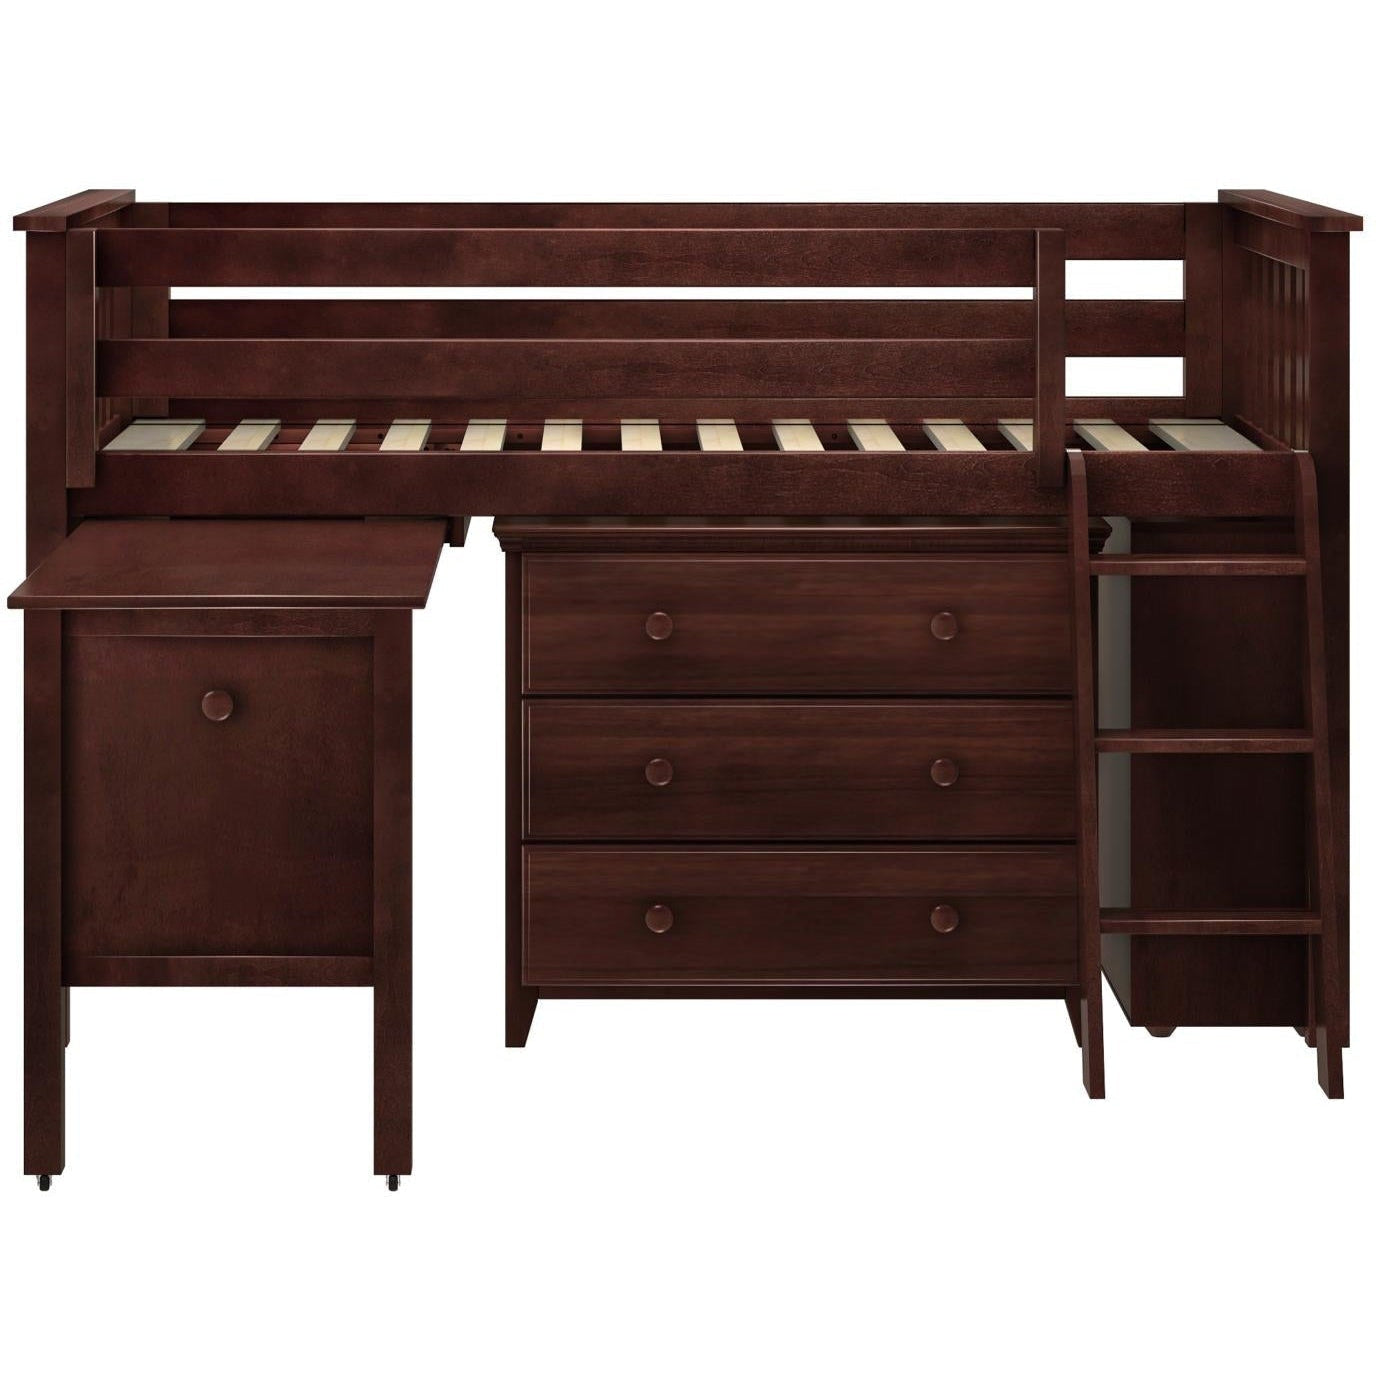 Jackpot Deluxe "WINDSOR 3" Twin Storage Loft Bed with Two Dressers and Desk